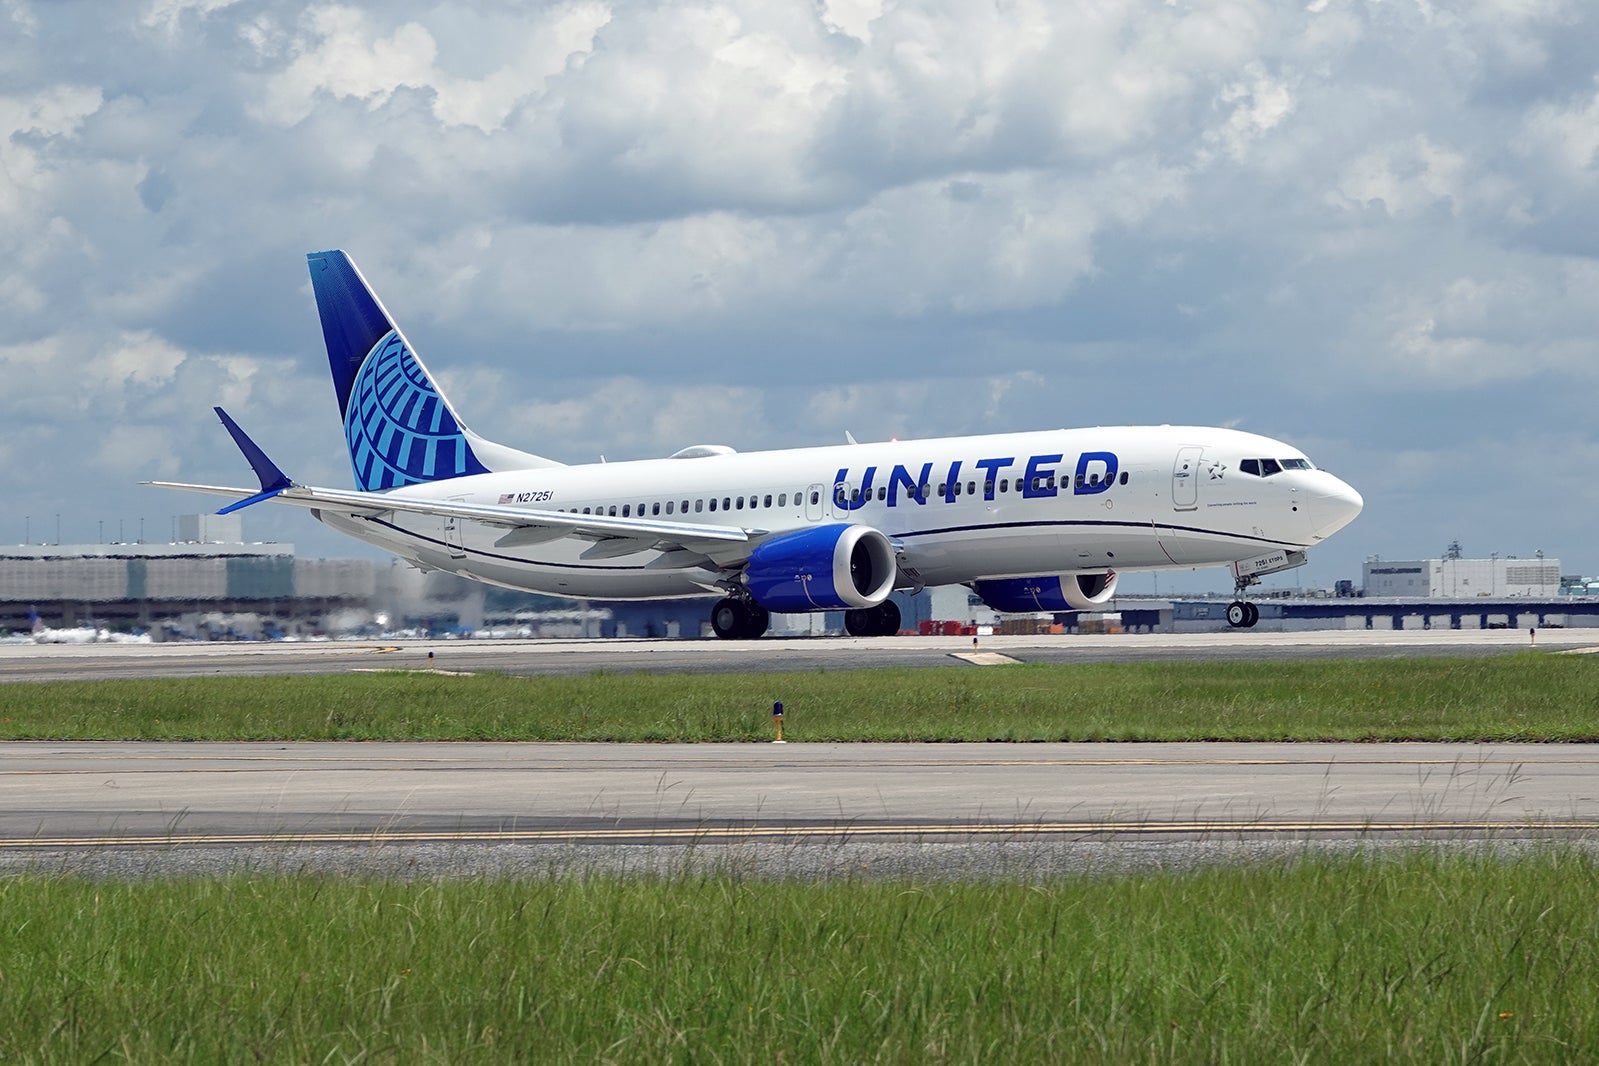 Exchange your unwanted gift cards for United miles